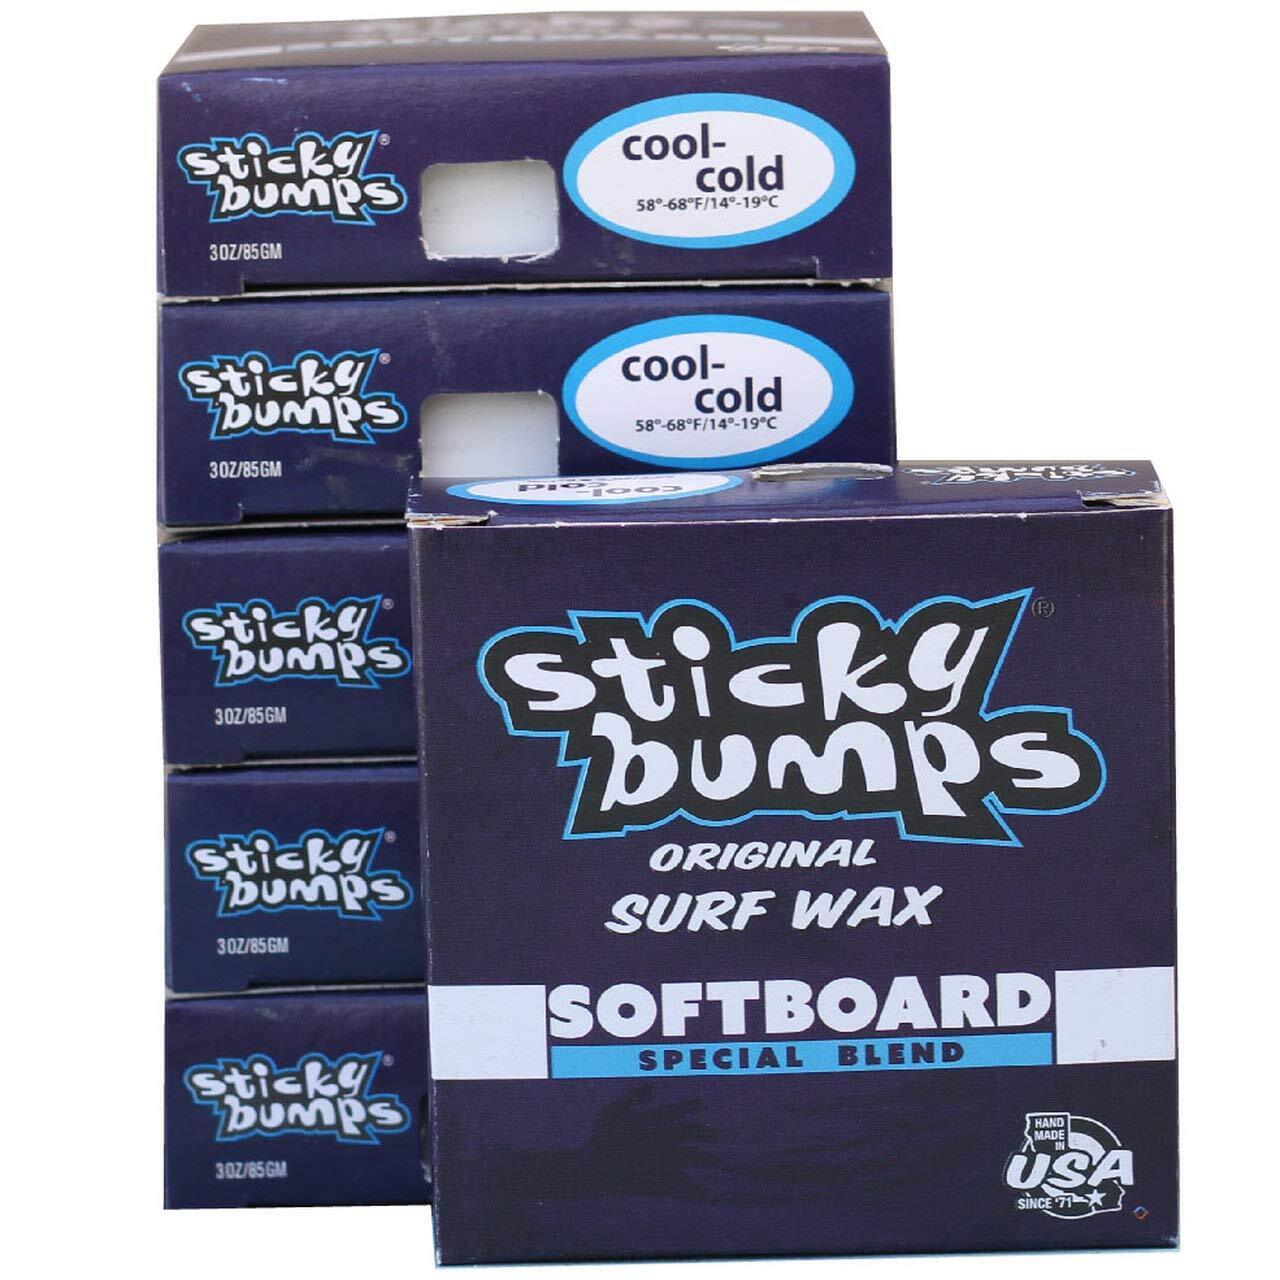 Sticky Bumps Softboard Wax - 6 Pack (choose Temperature) Cool/cold